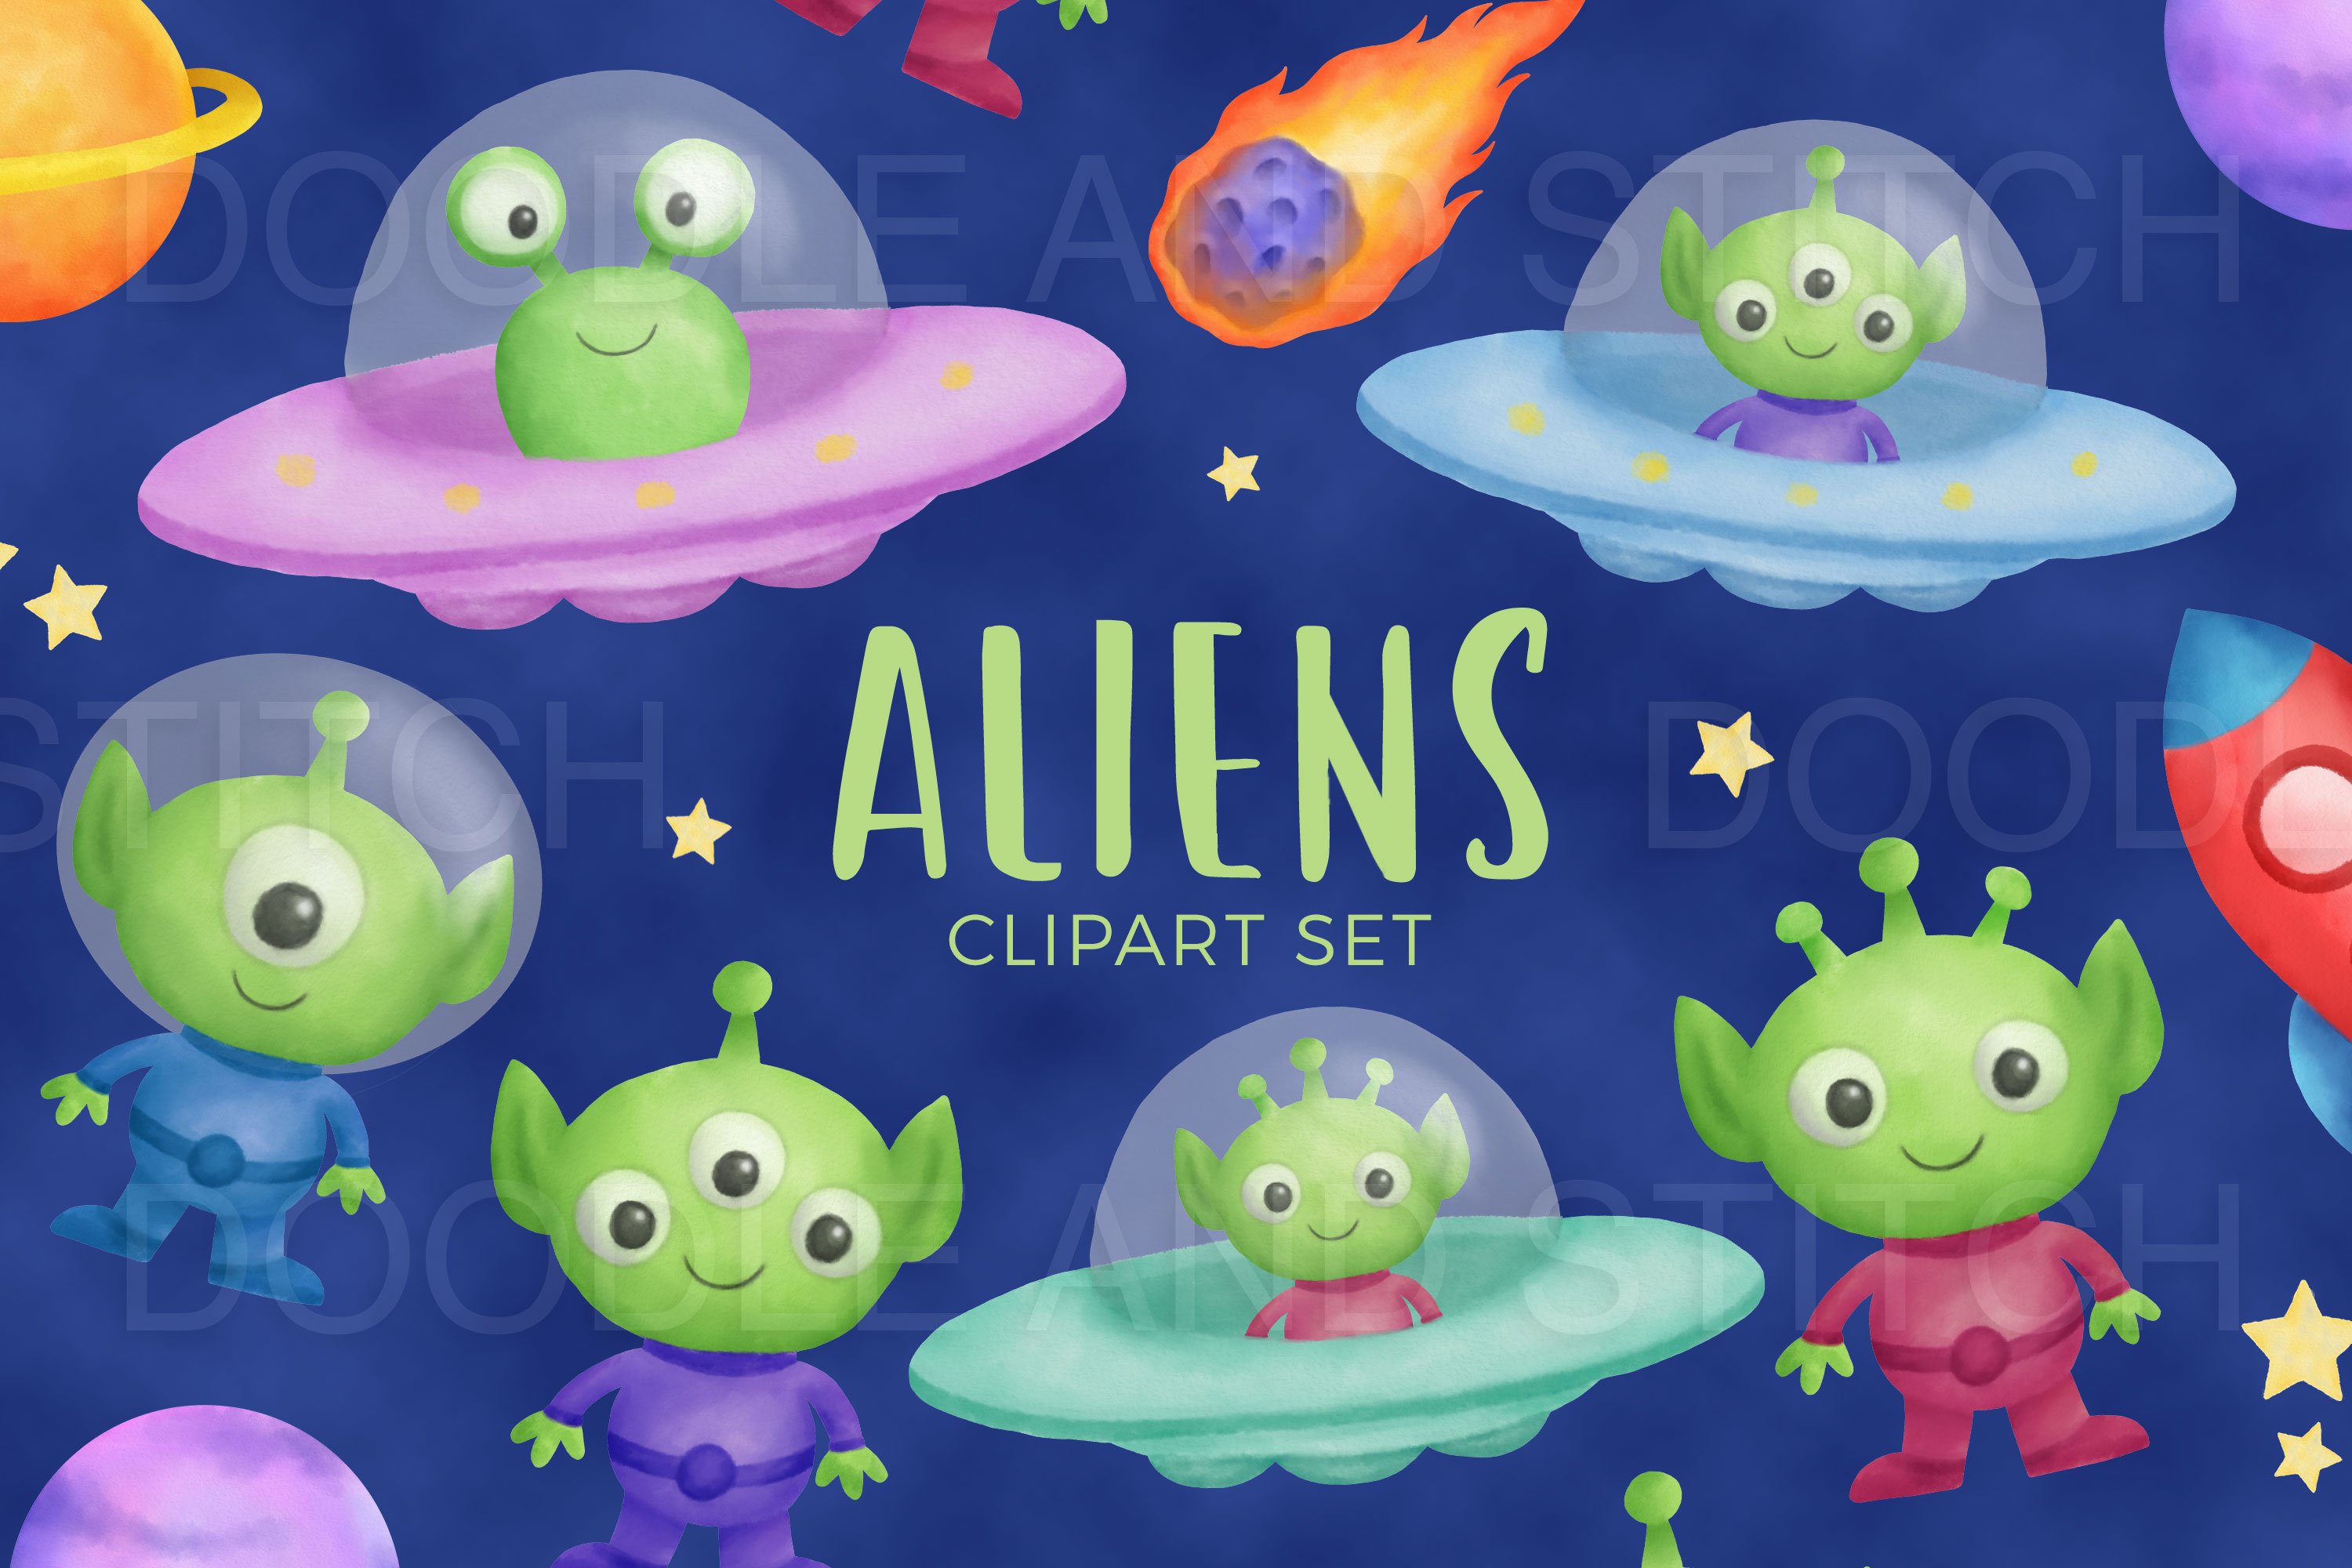 Cute Aliens Clipart Illustrations cover image.